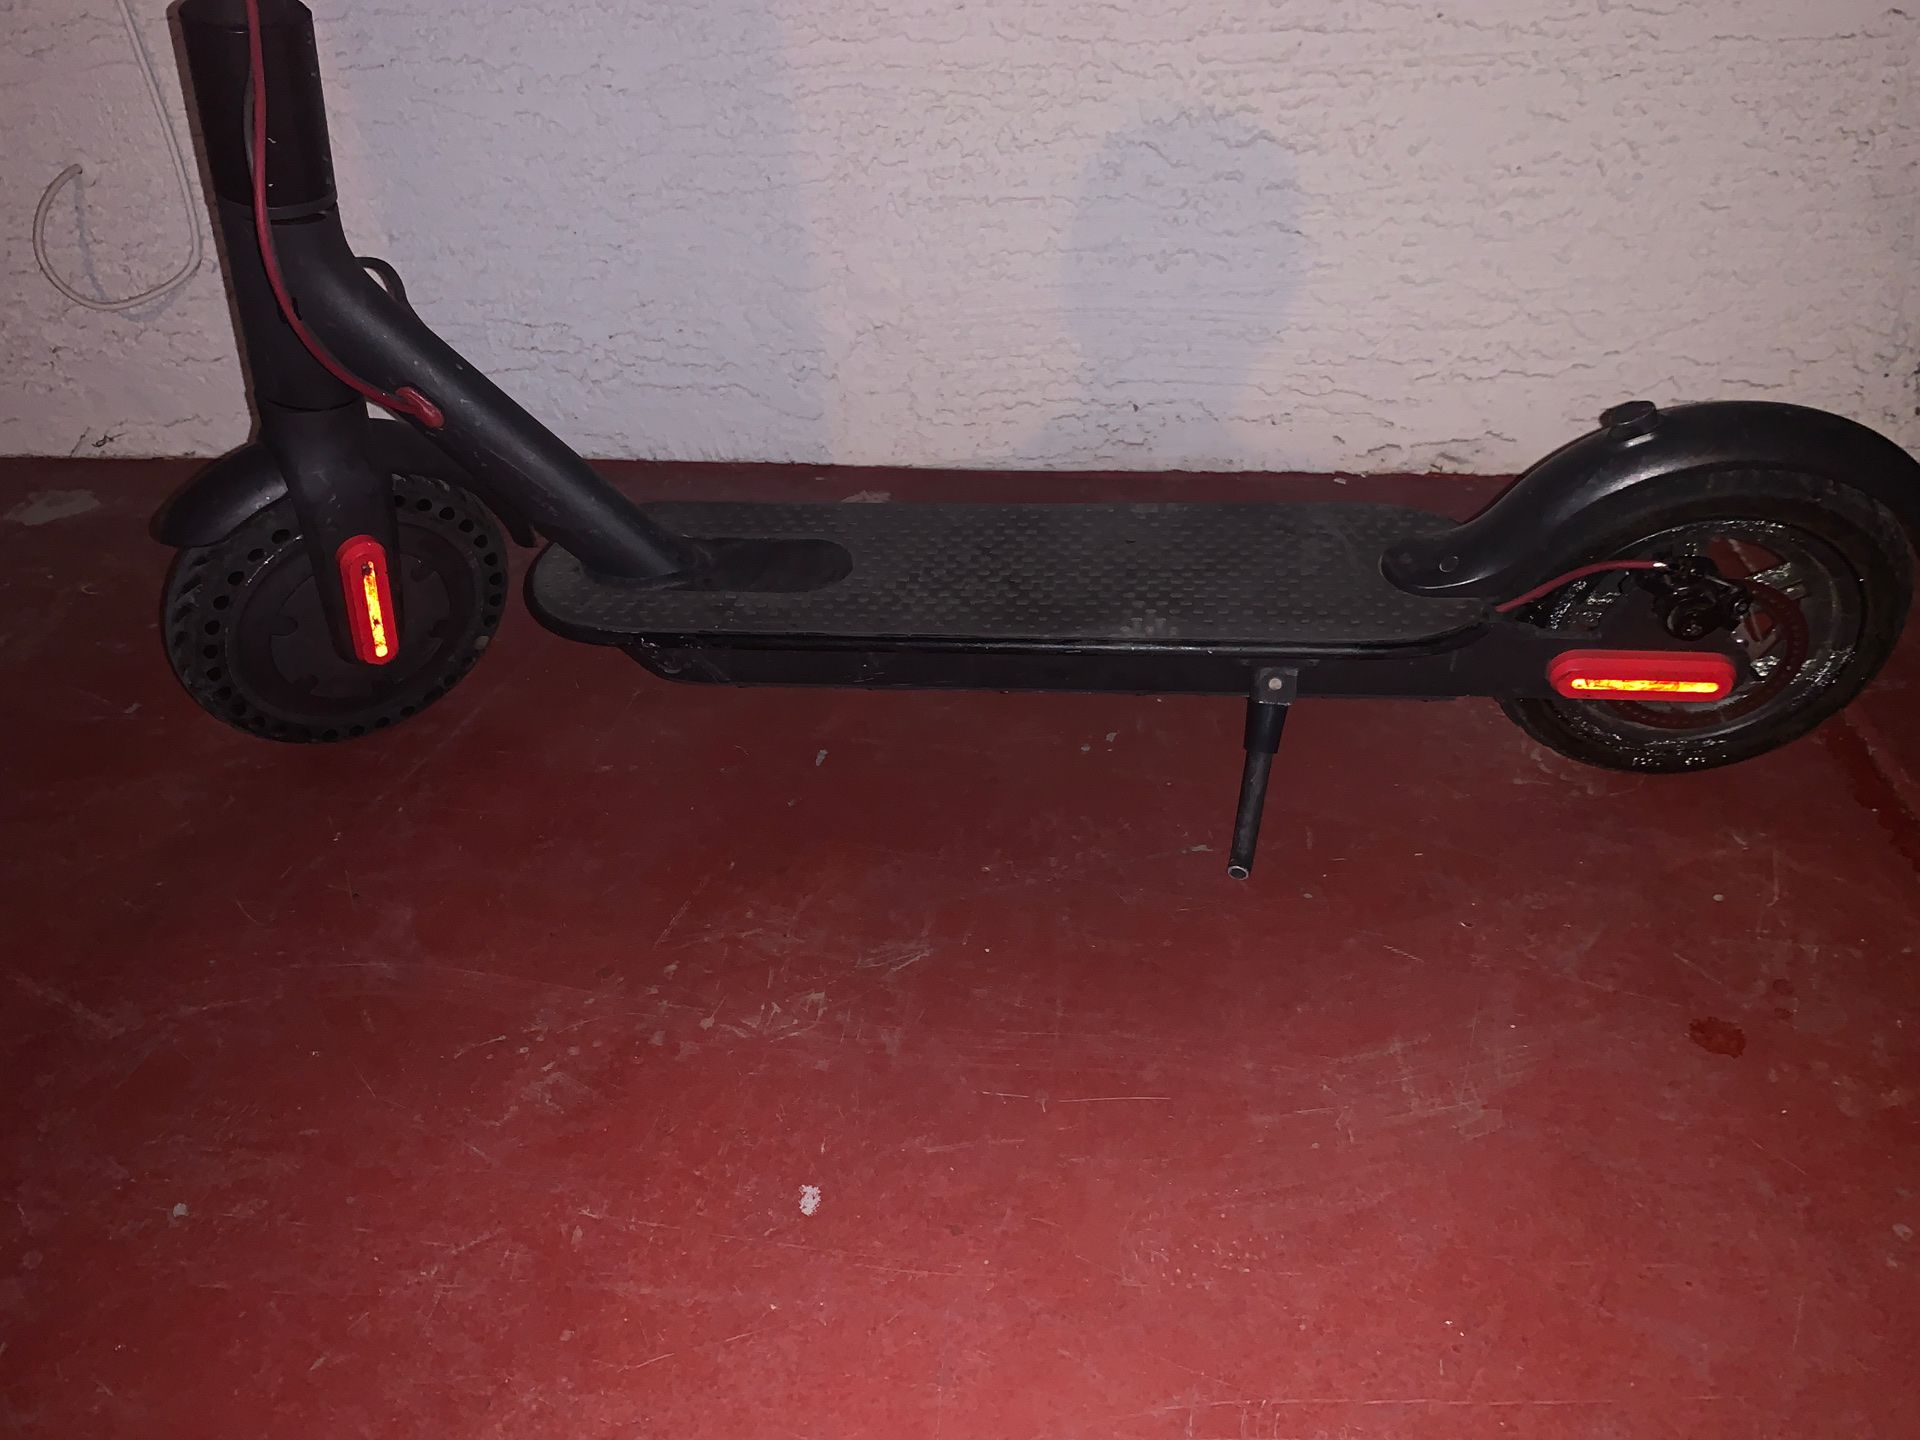 Xiaomi M365 Electric Scooter